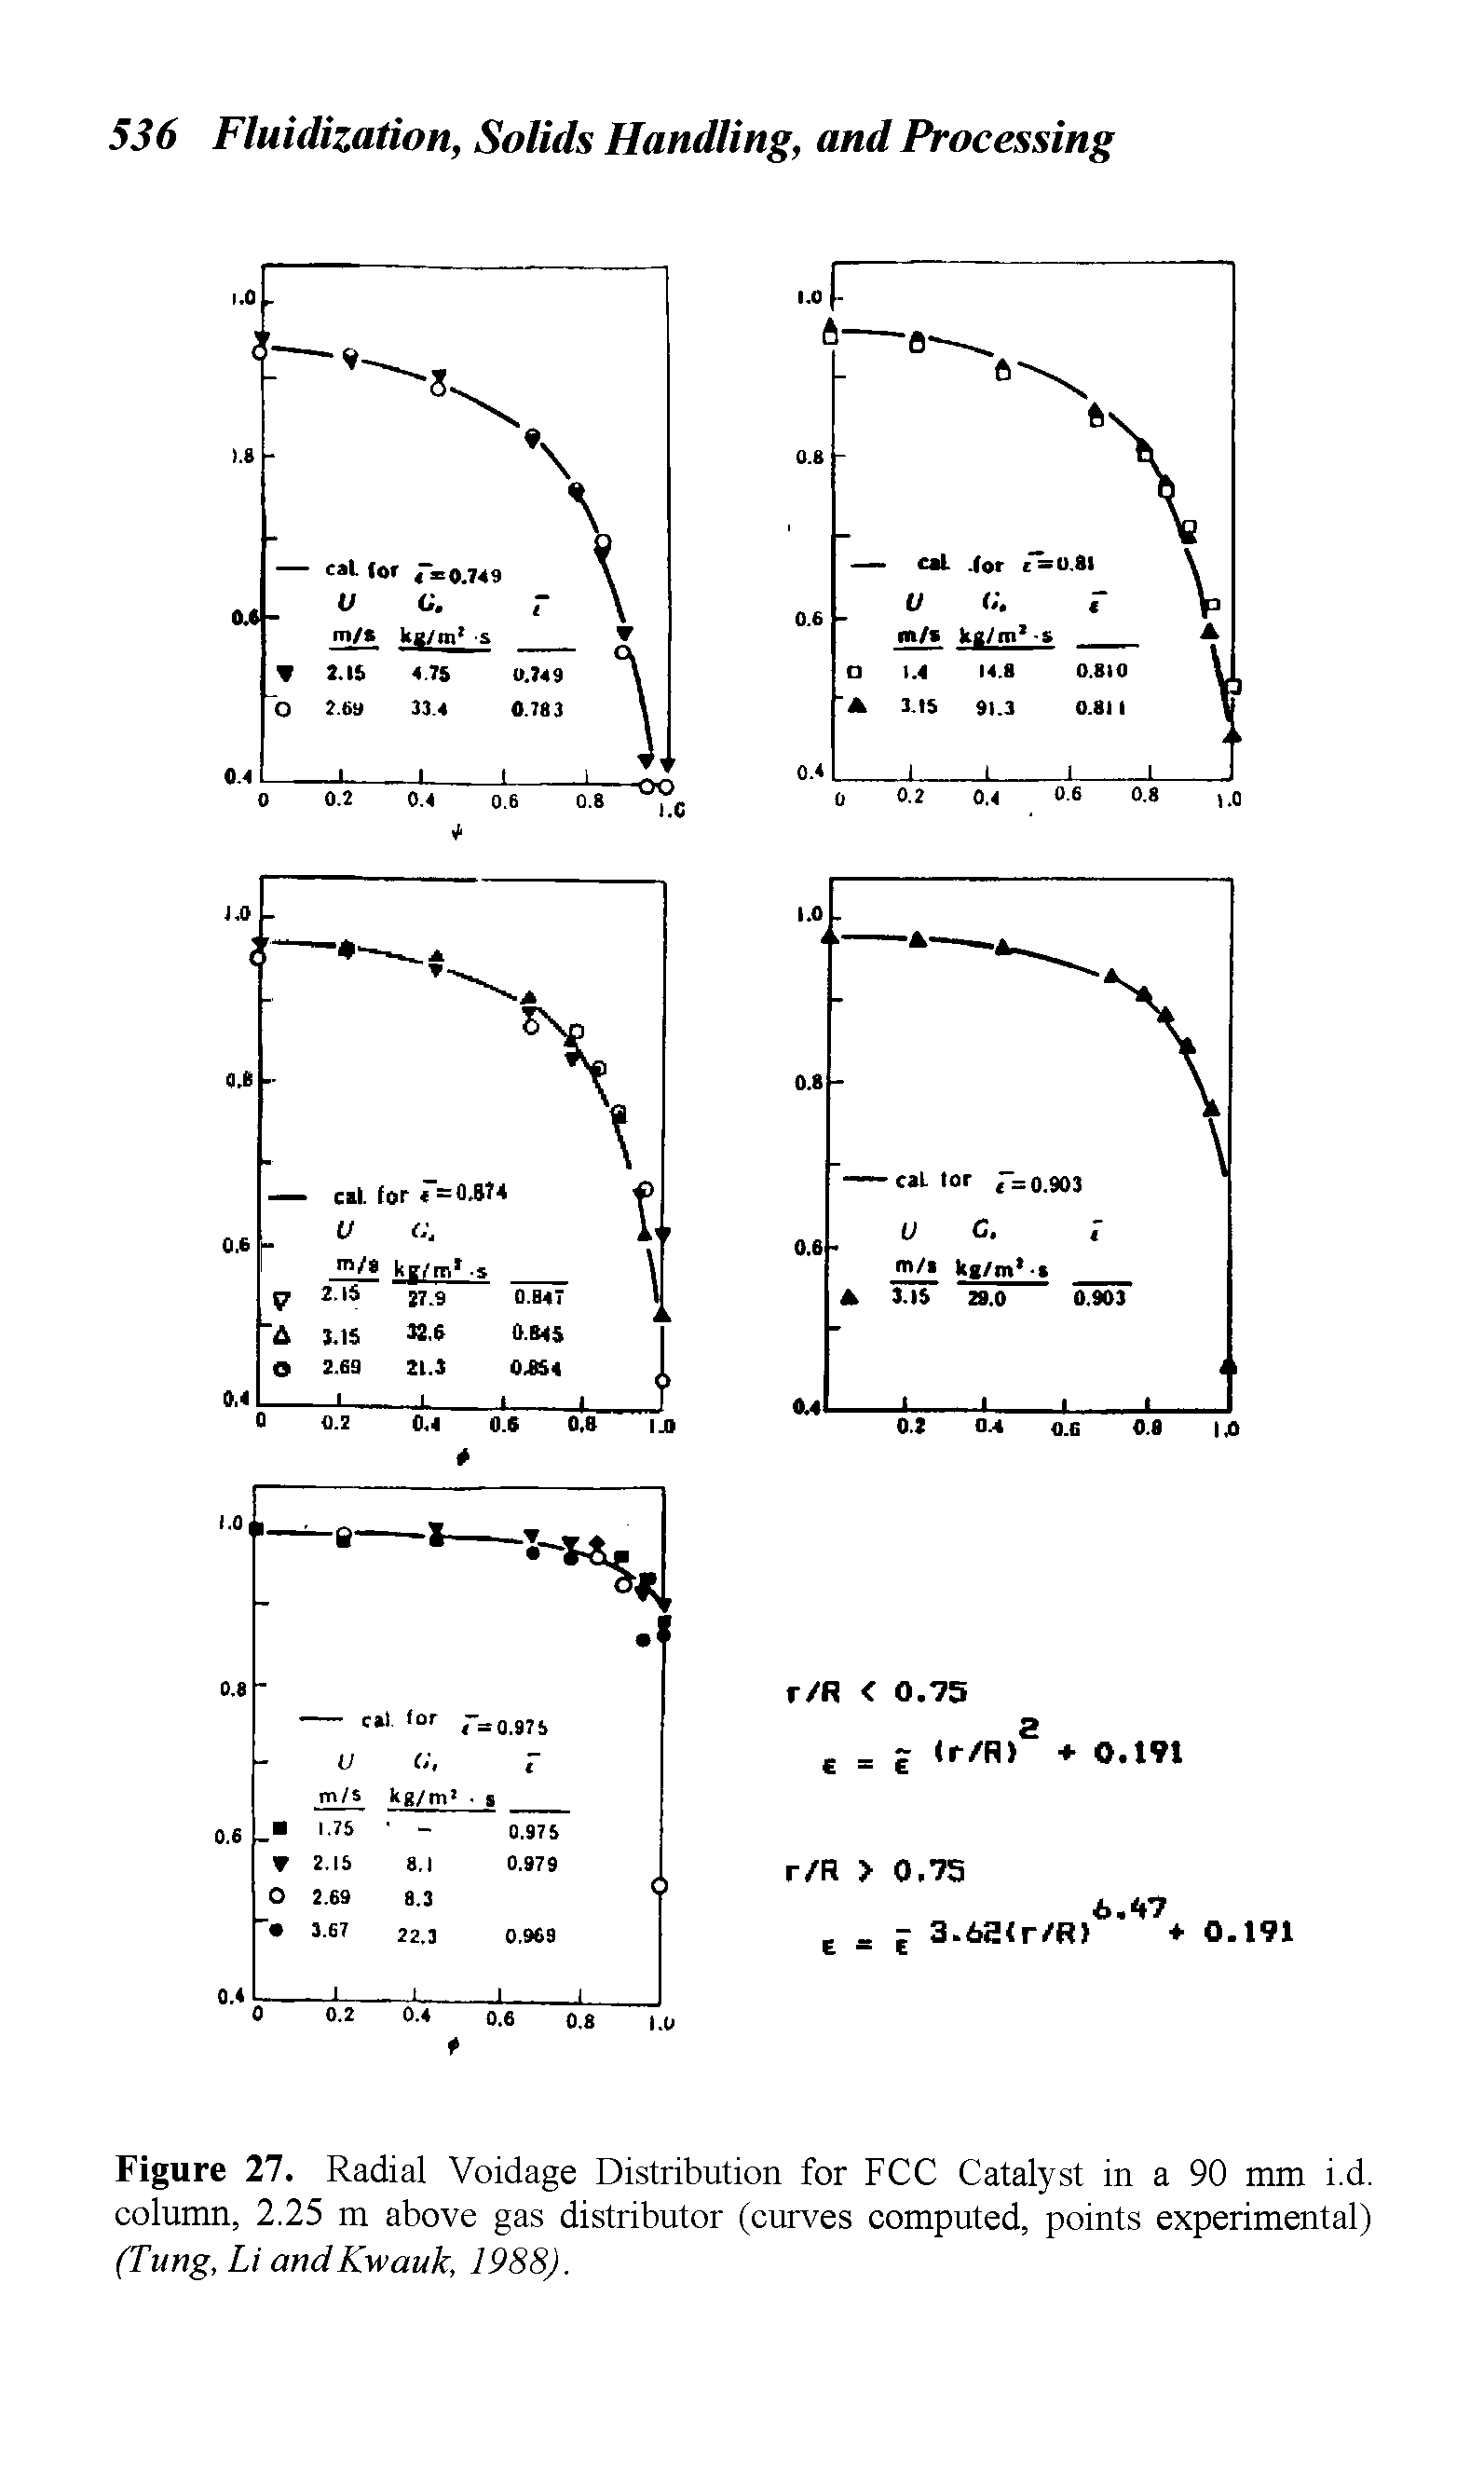 Figure 27. Radial Voidage Distribution for FCC Catalyst in a 90 mm i.d. column, 2.25 m above gas distributor (curves computed, points experimental) (Tung, Li andKwauk, 1988).